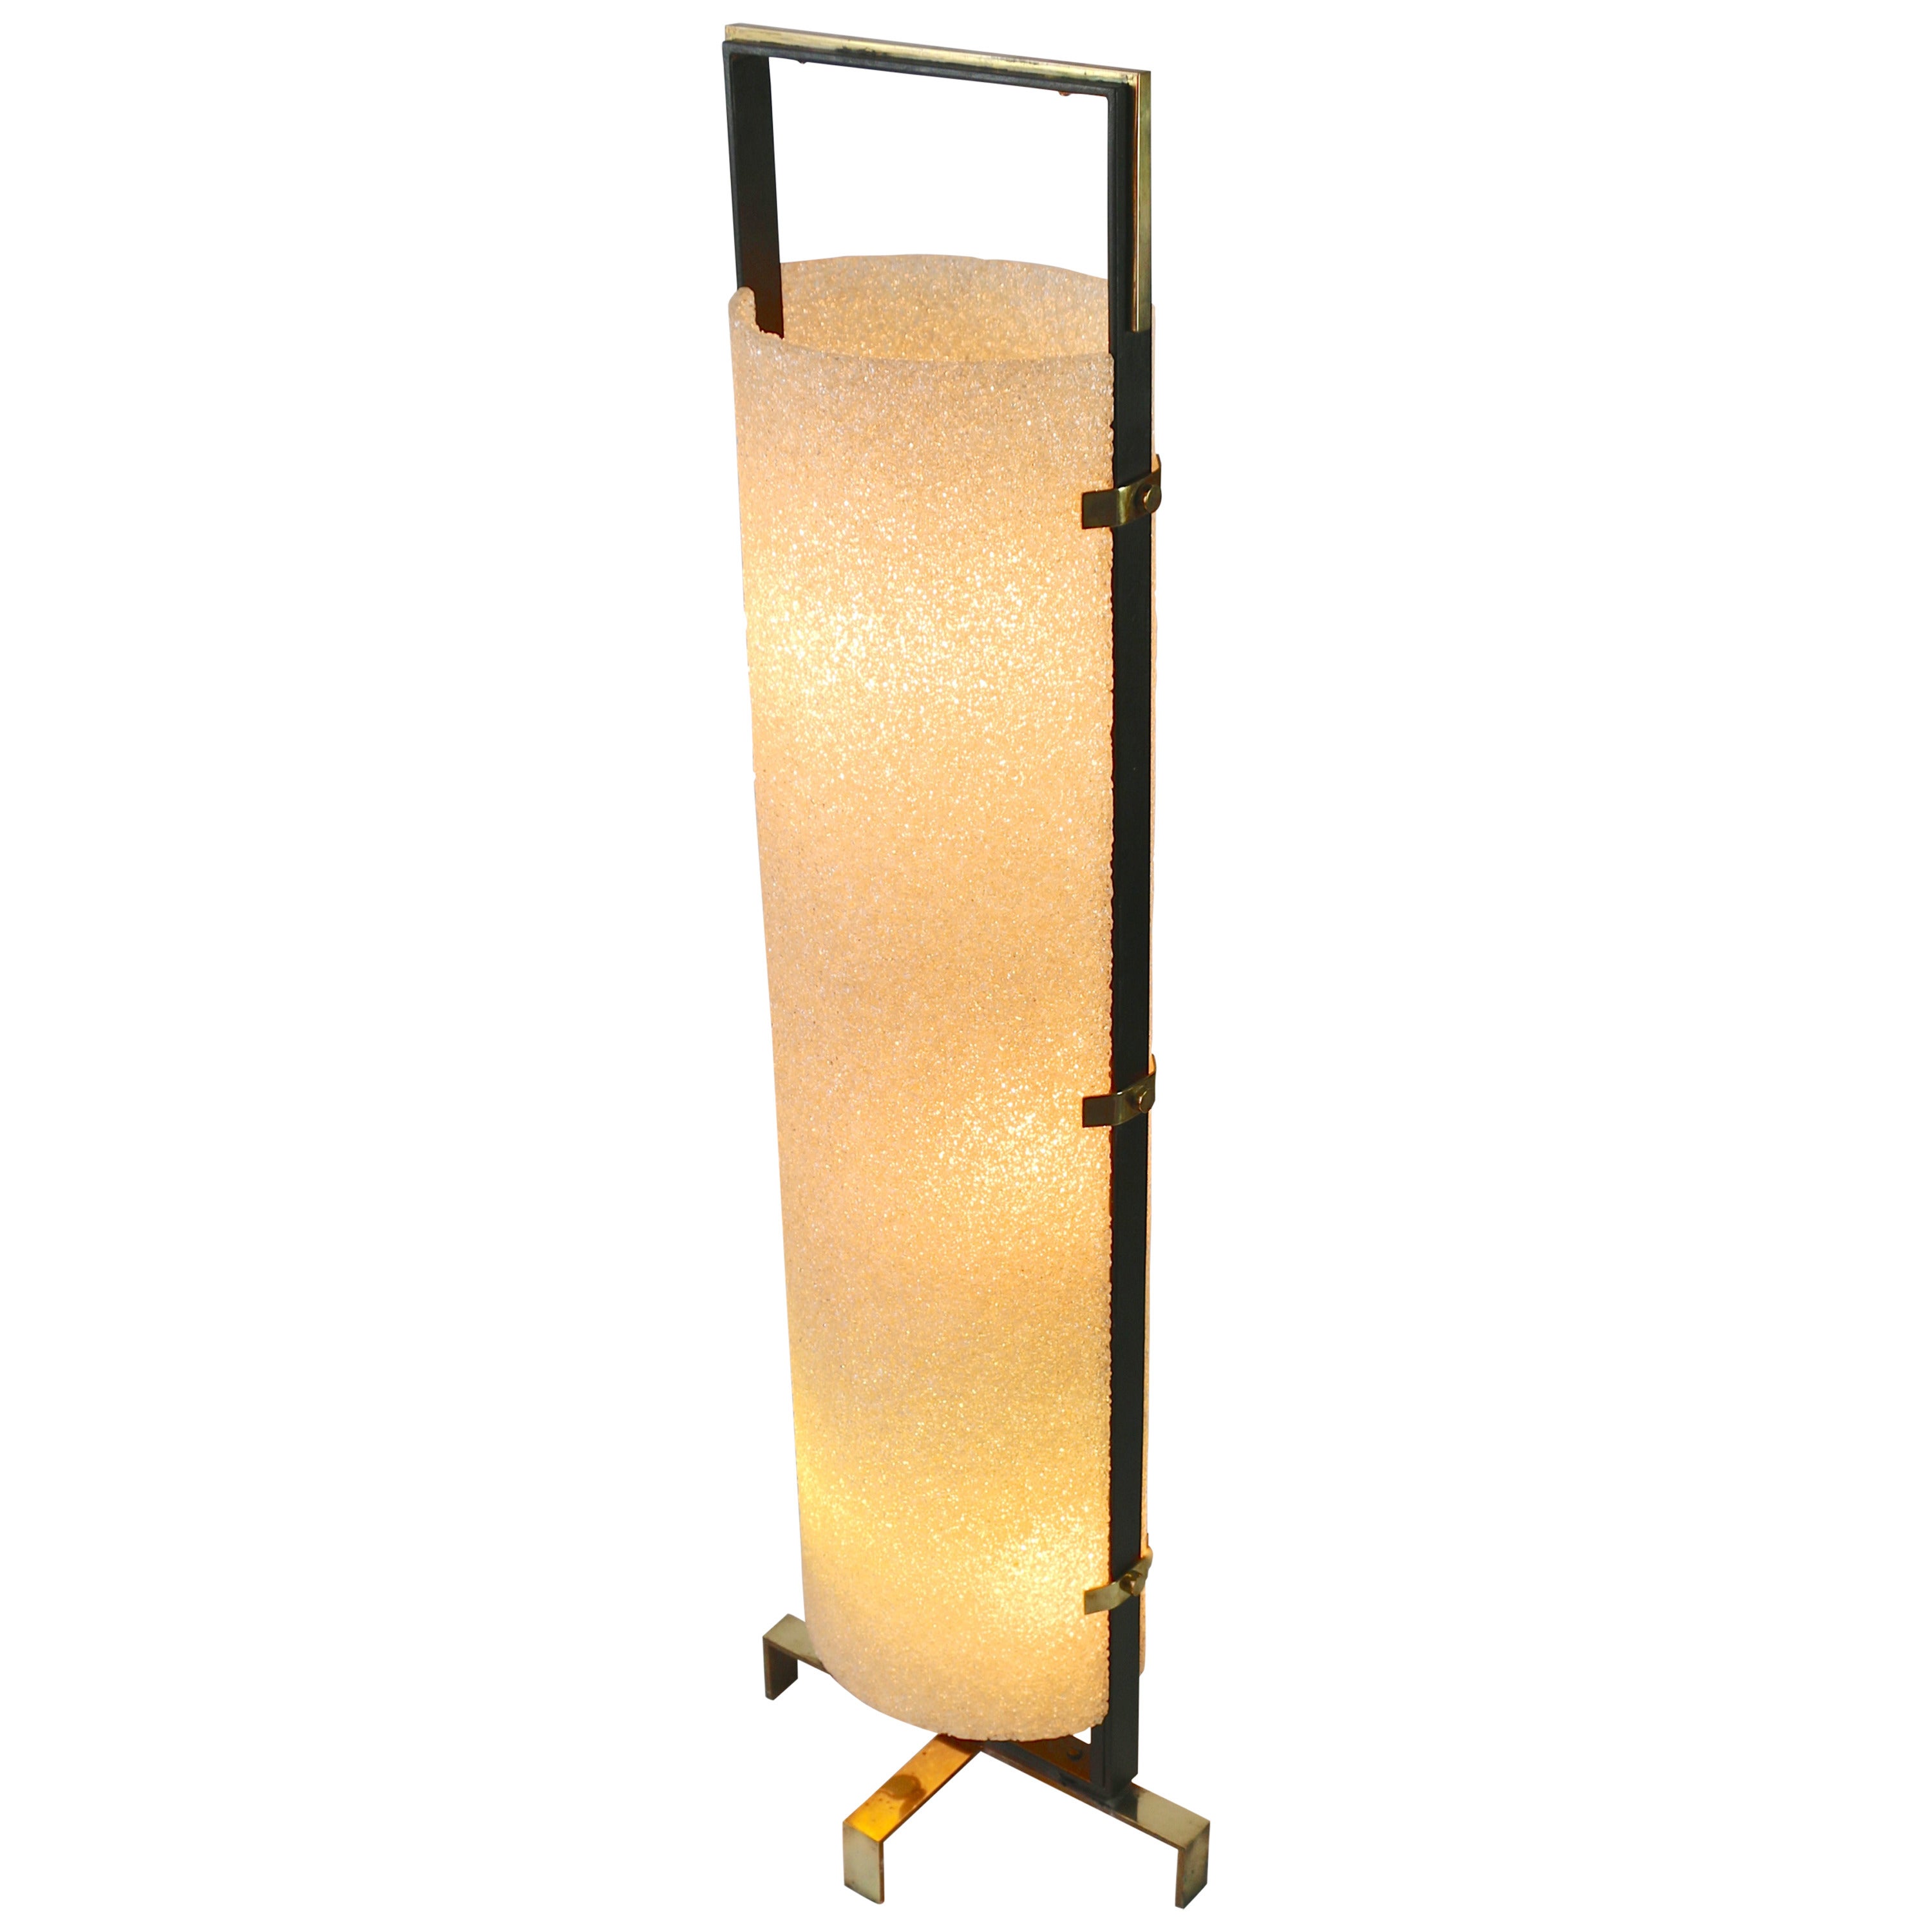 1970s Honeycombed Resin Floor Lamp For Sale